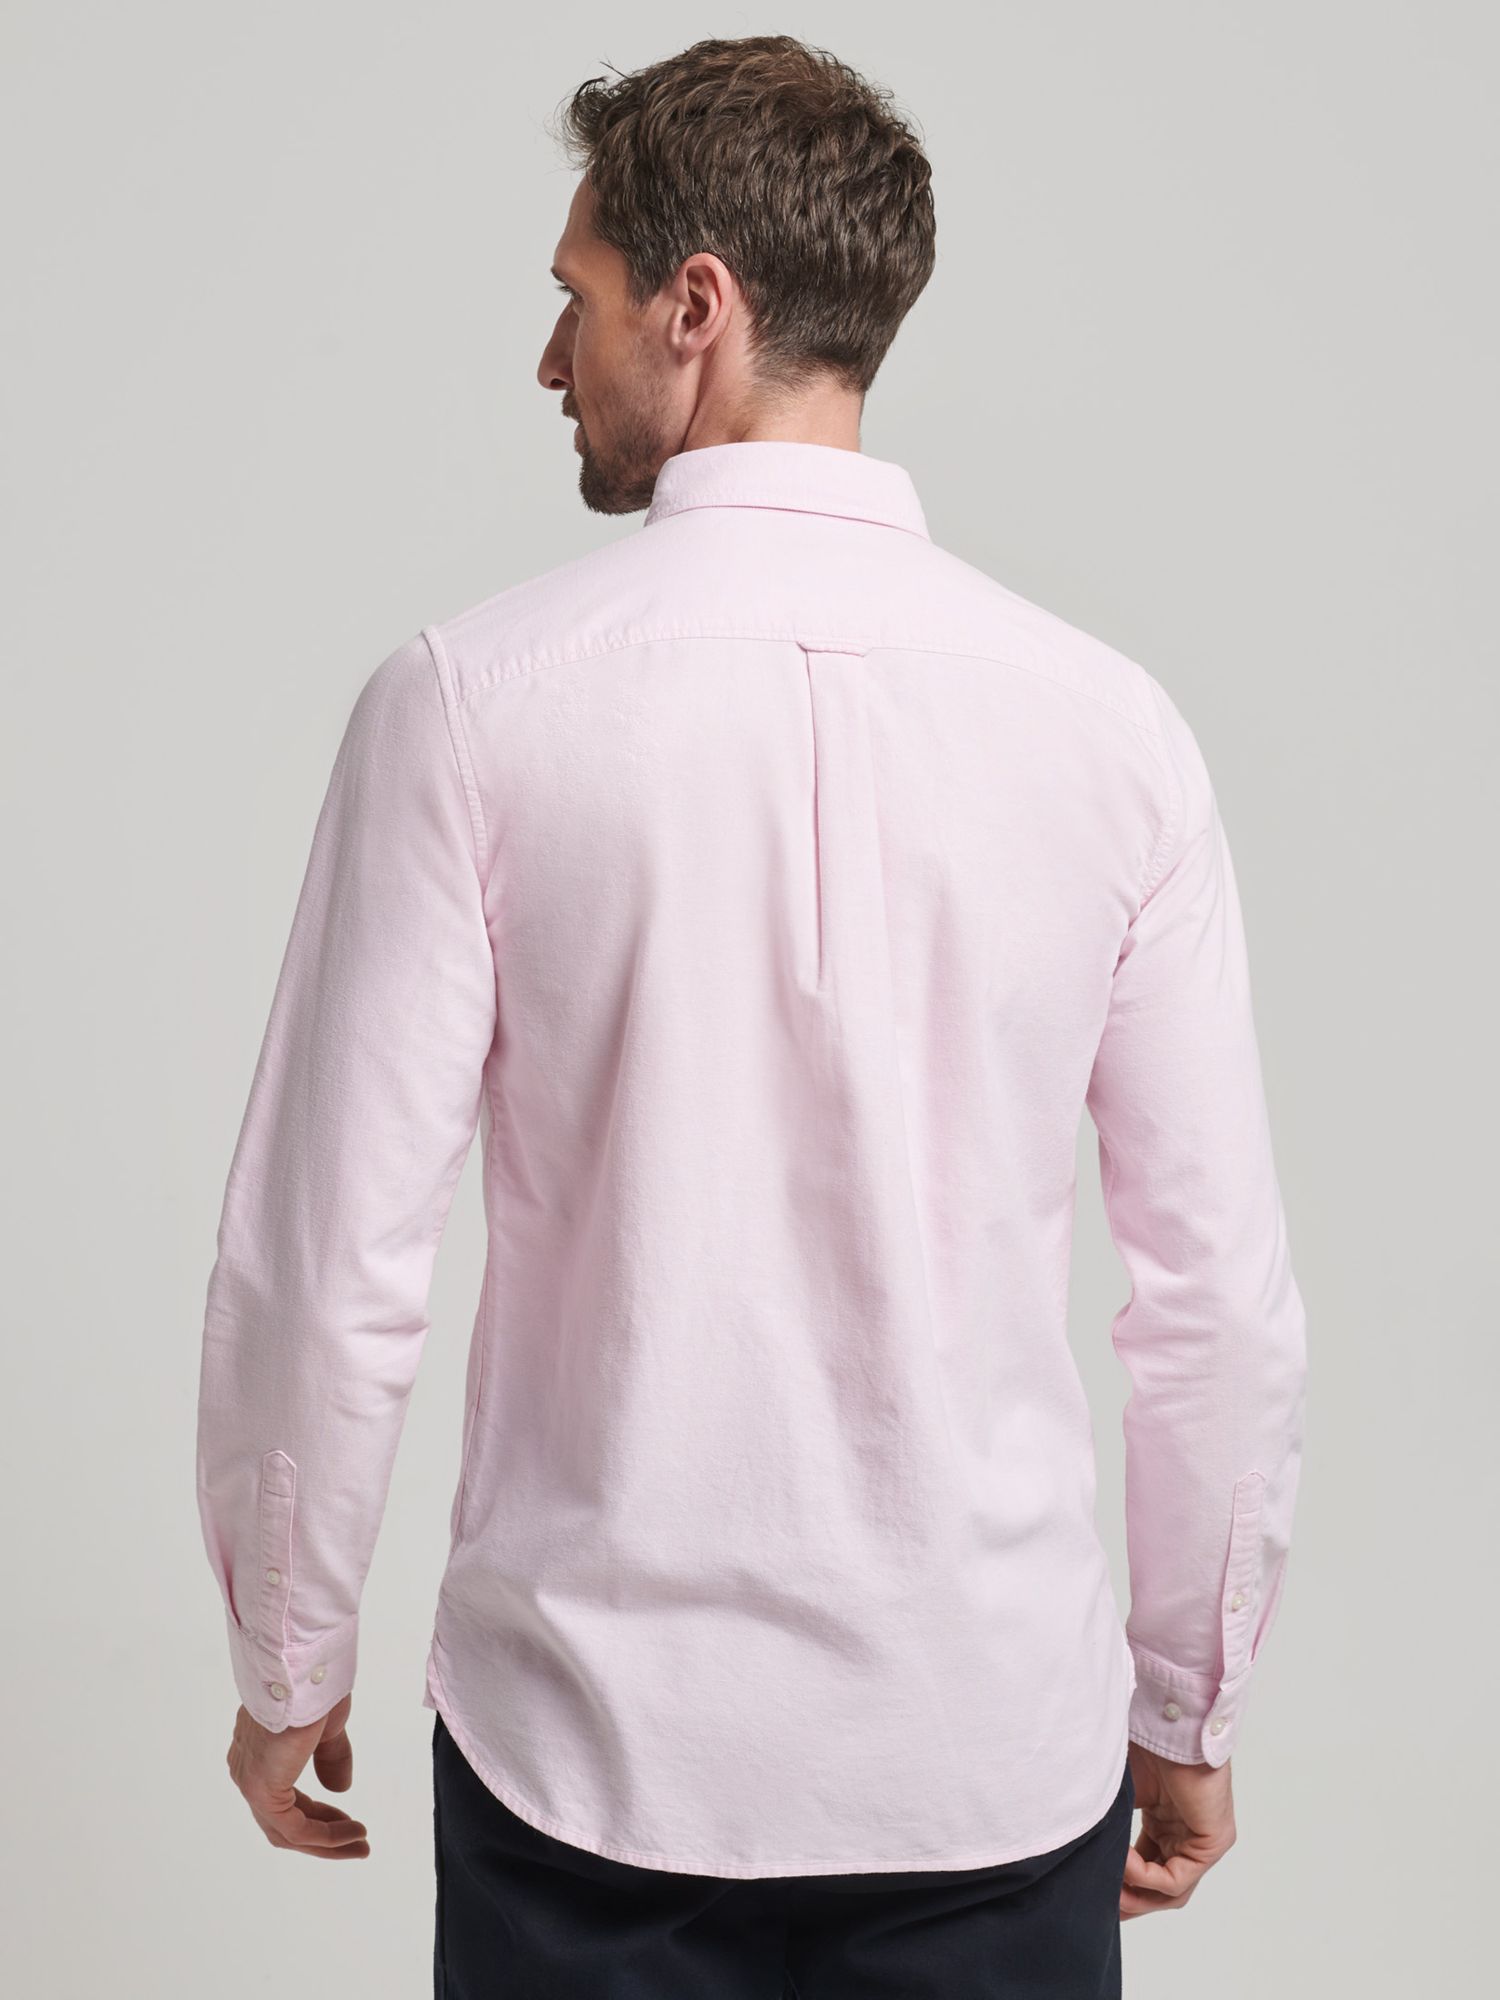 Superdry Washed Oxford Shirt, City Pink at John Lewis & Partners